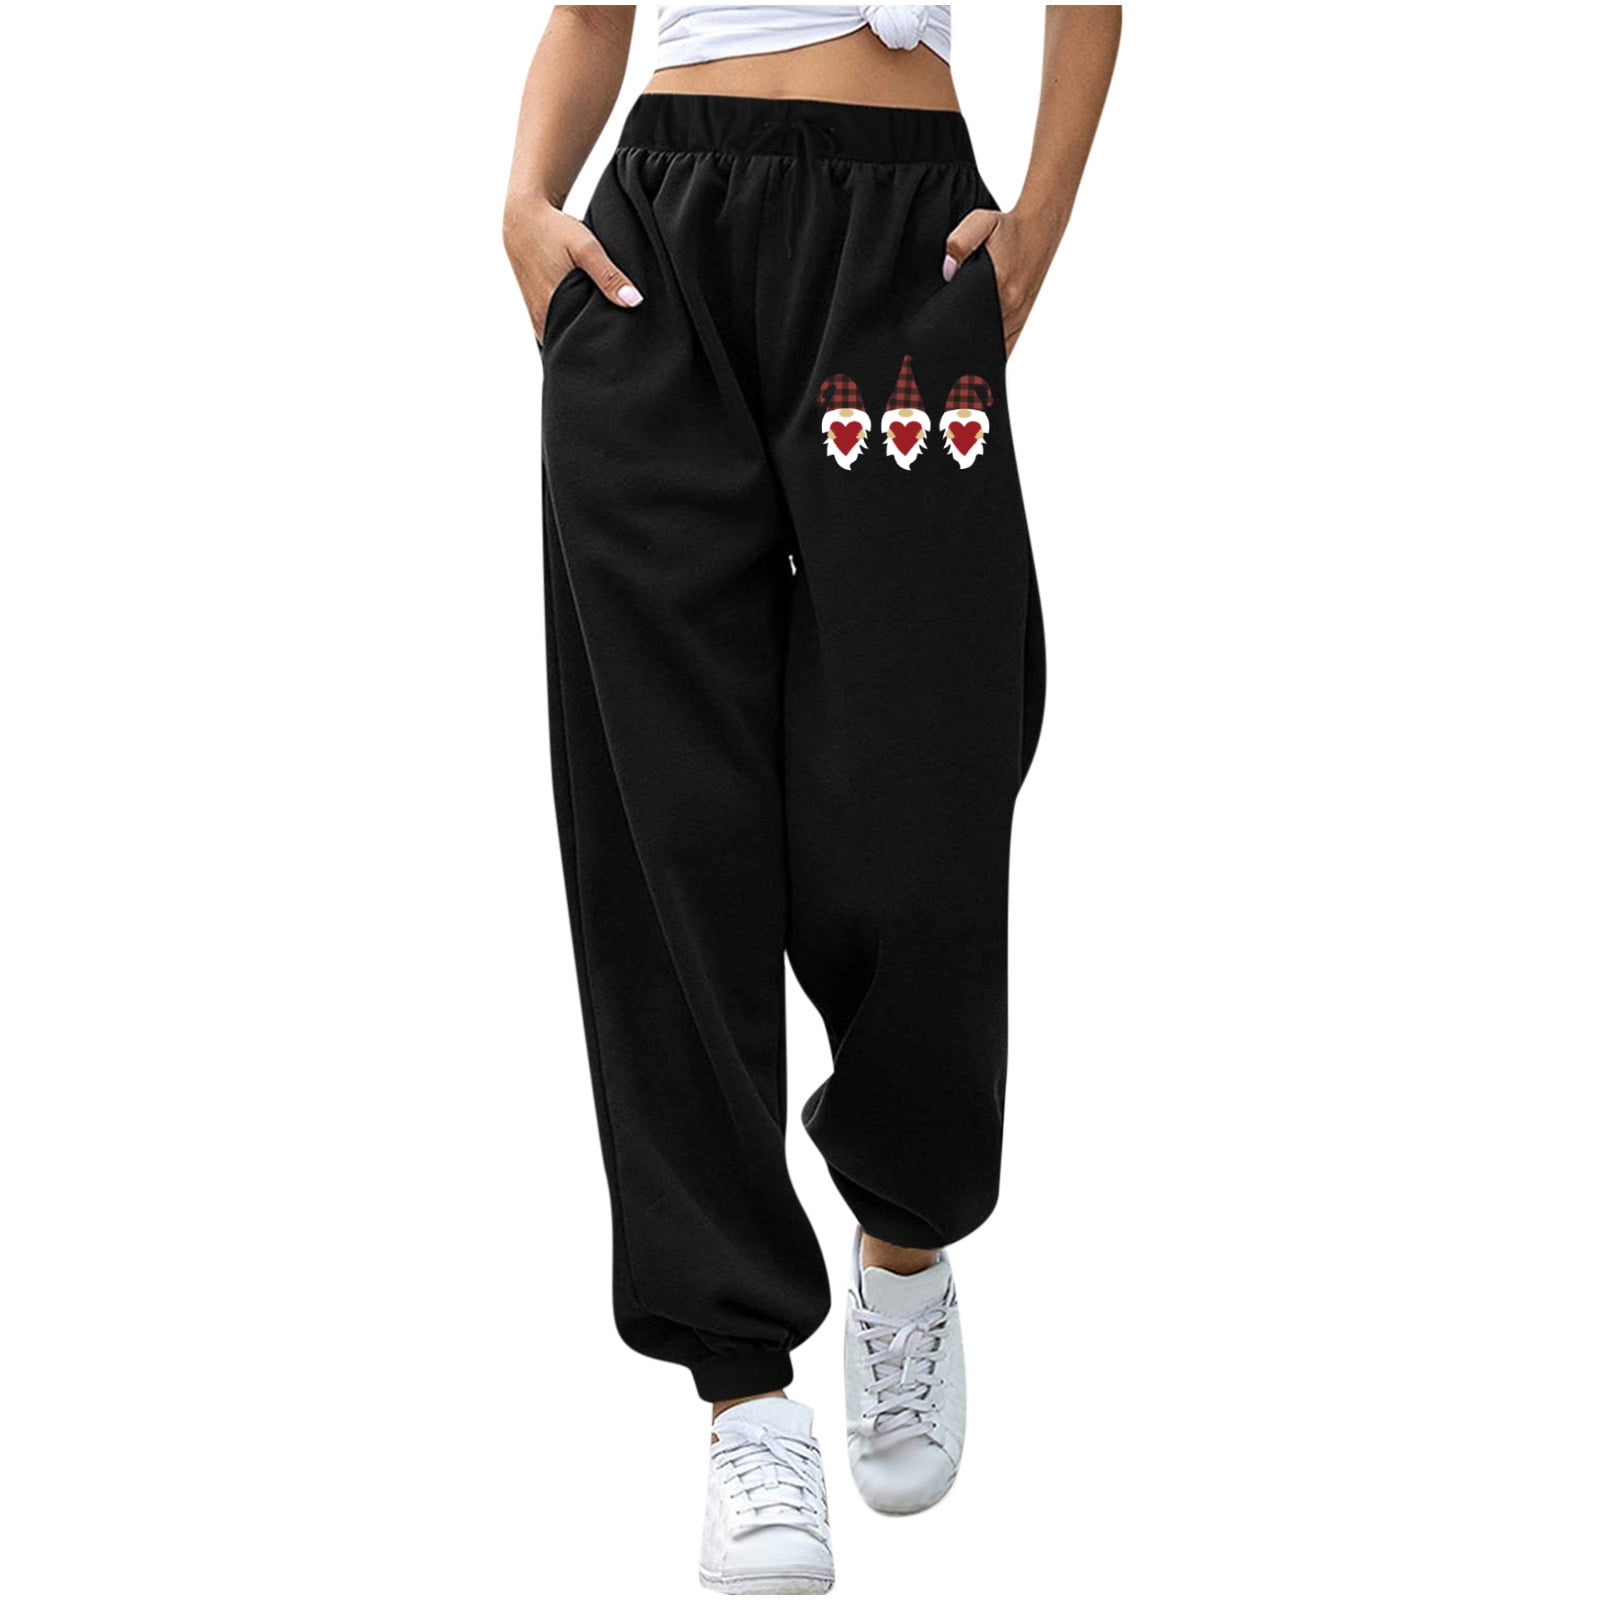 Love & Sports Women's Quilted Jogger Pants, 27” Inseam, Sizes XS-XXXL